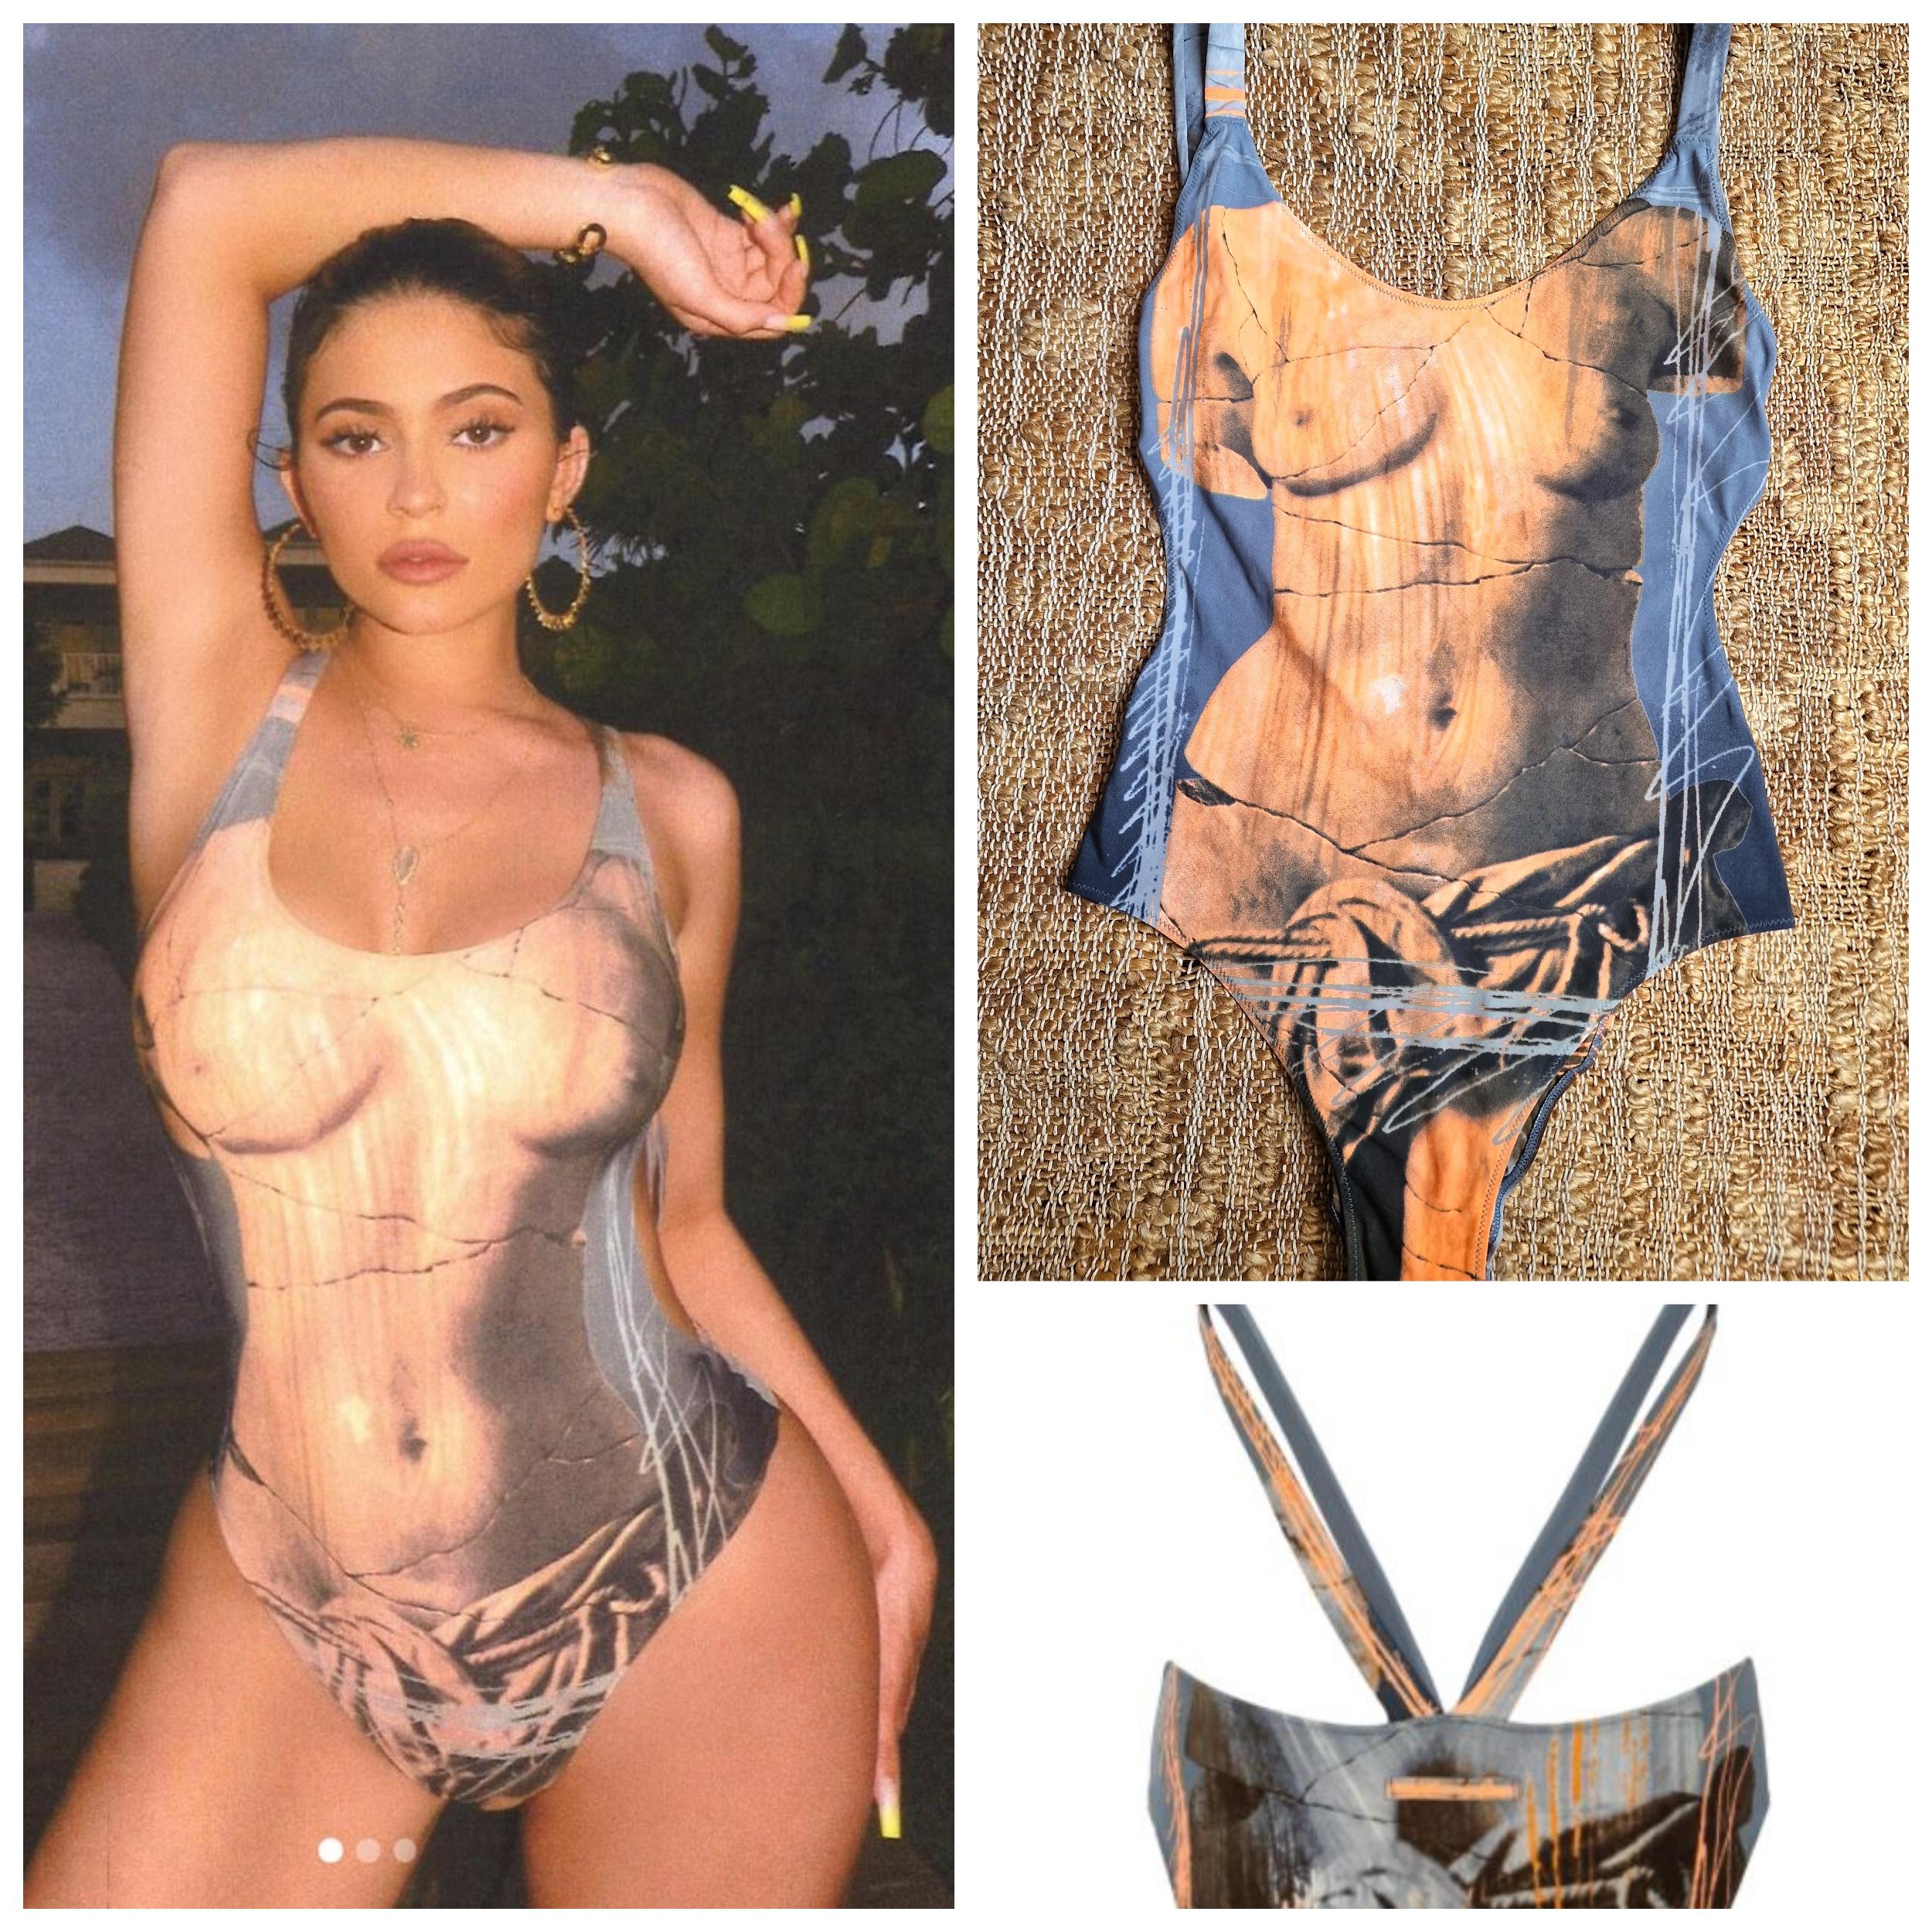 Iconic Jean Paul Gaultier swimsuit!
A rare spandex one-piece in the iconic printed Venus de Milo print from the spring 1999 collection.
The same was worn by Kylie Jenner!

NEW without Tag!

SIZE
Marked size: IT46.
Large.
Very stretchy